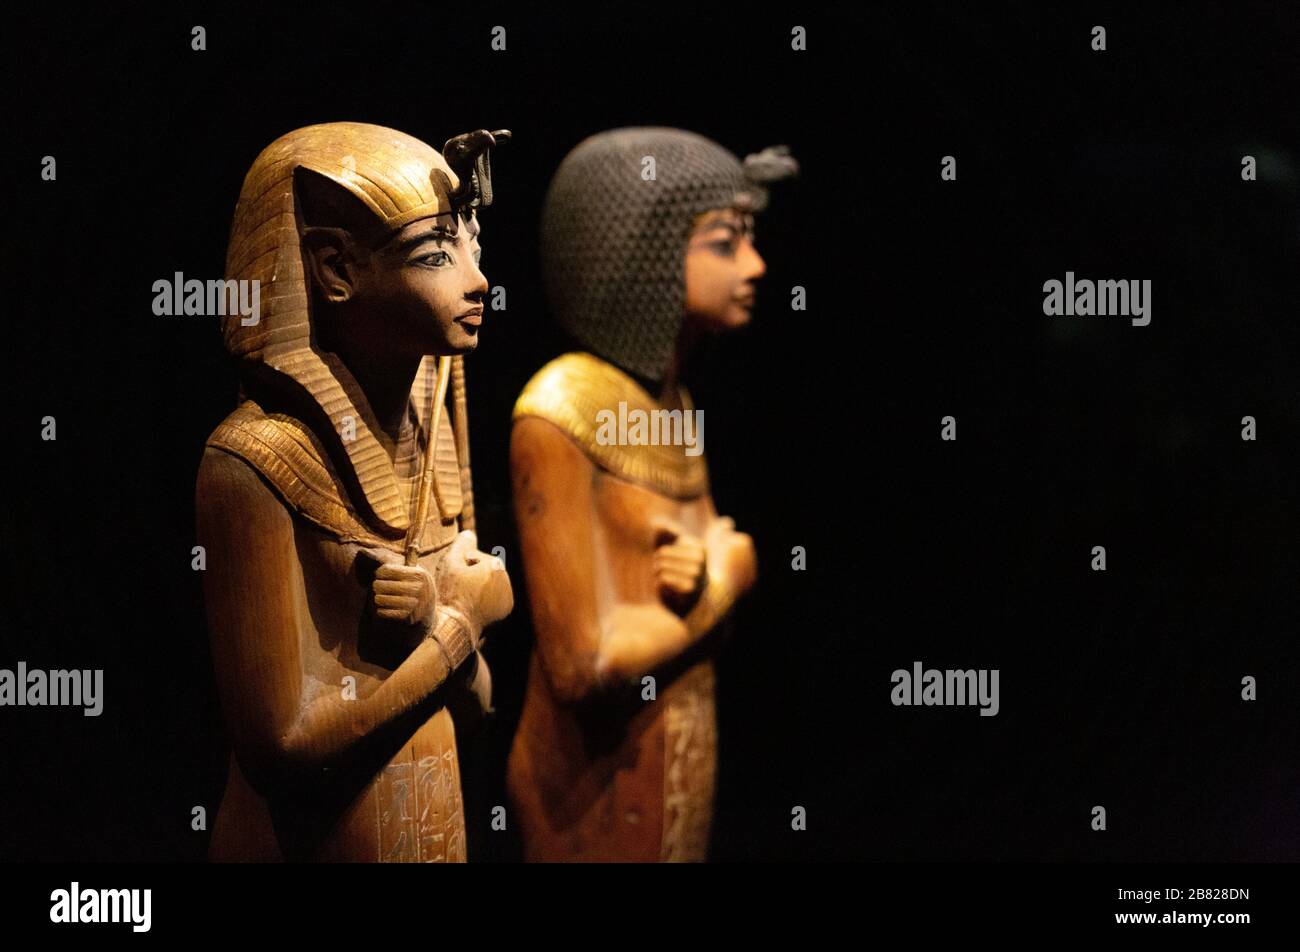 Tutankhamun tomb treasures; painted wooden shabtis, or figurines wearing Nemes Headdress and Nubian Wig, from Ancient Egypt Stock Photo